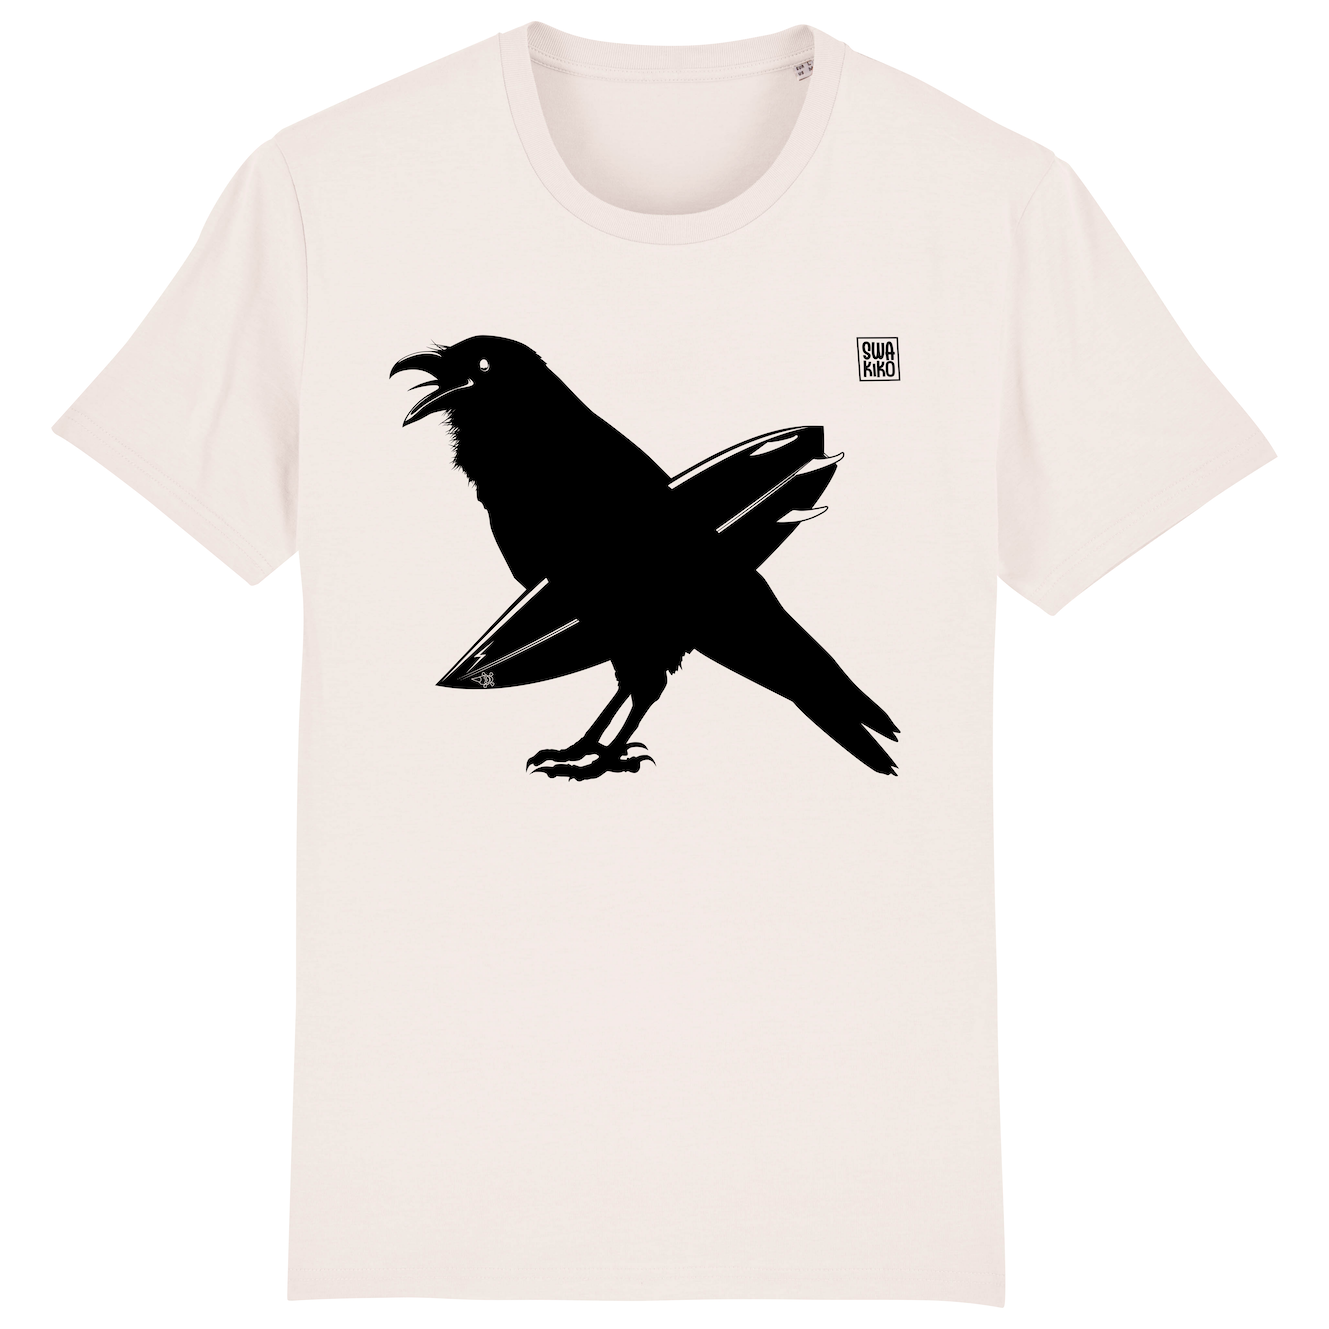 Surf t-shirt men off white, The Snaking Crow